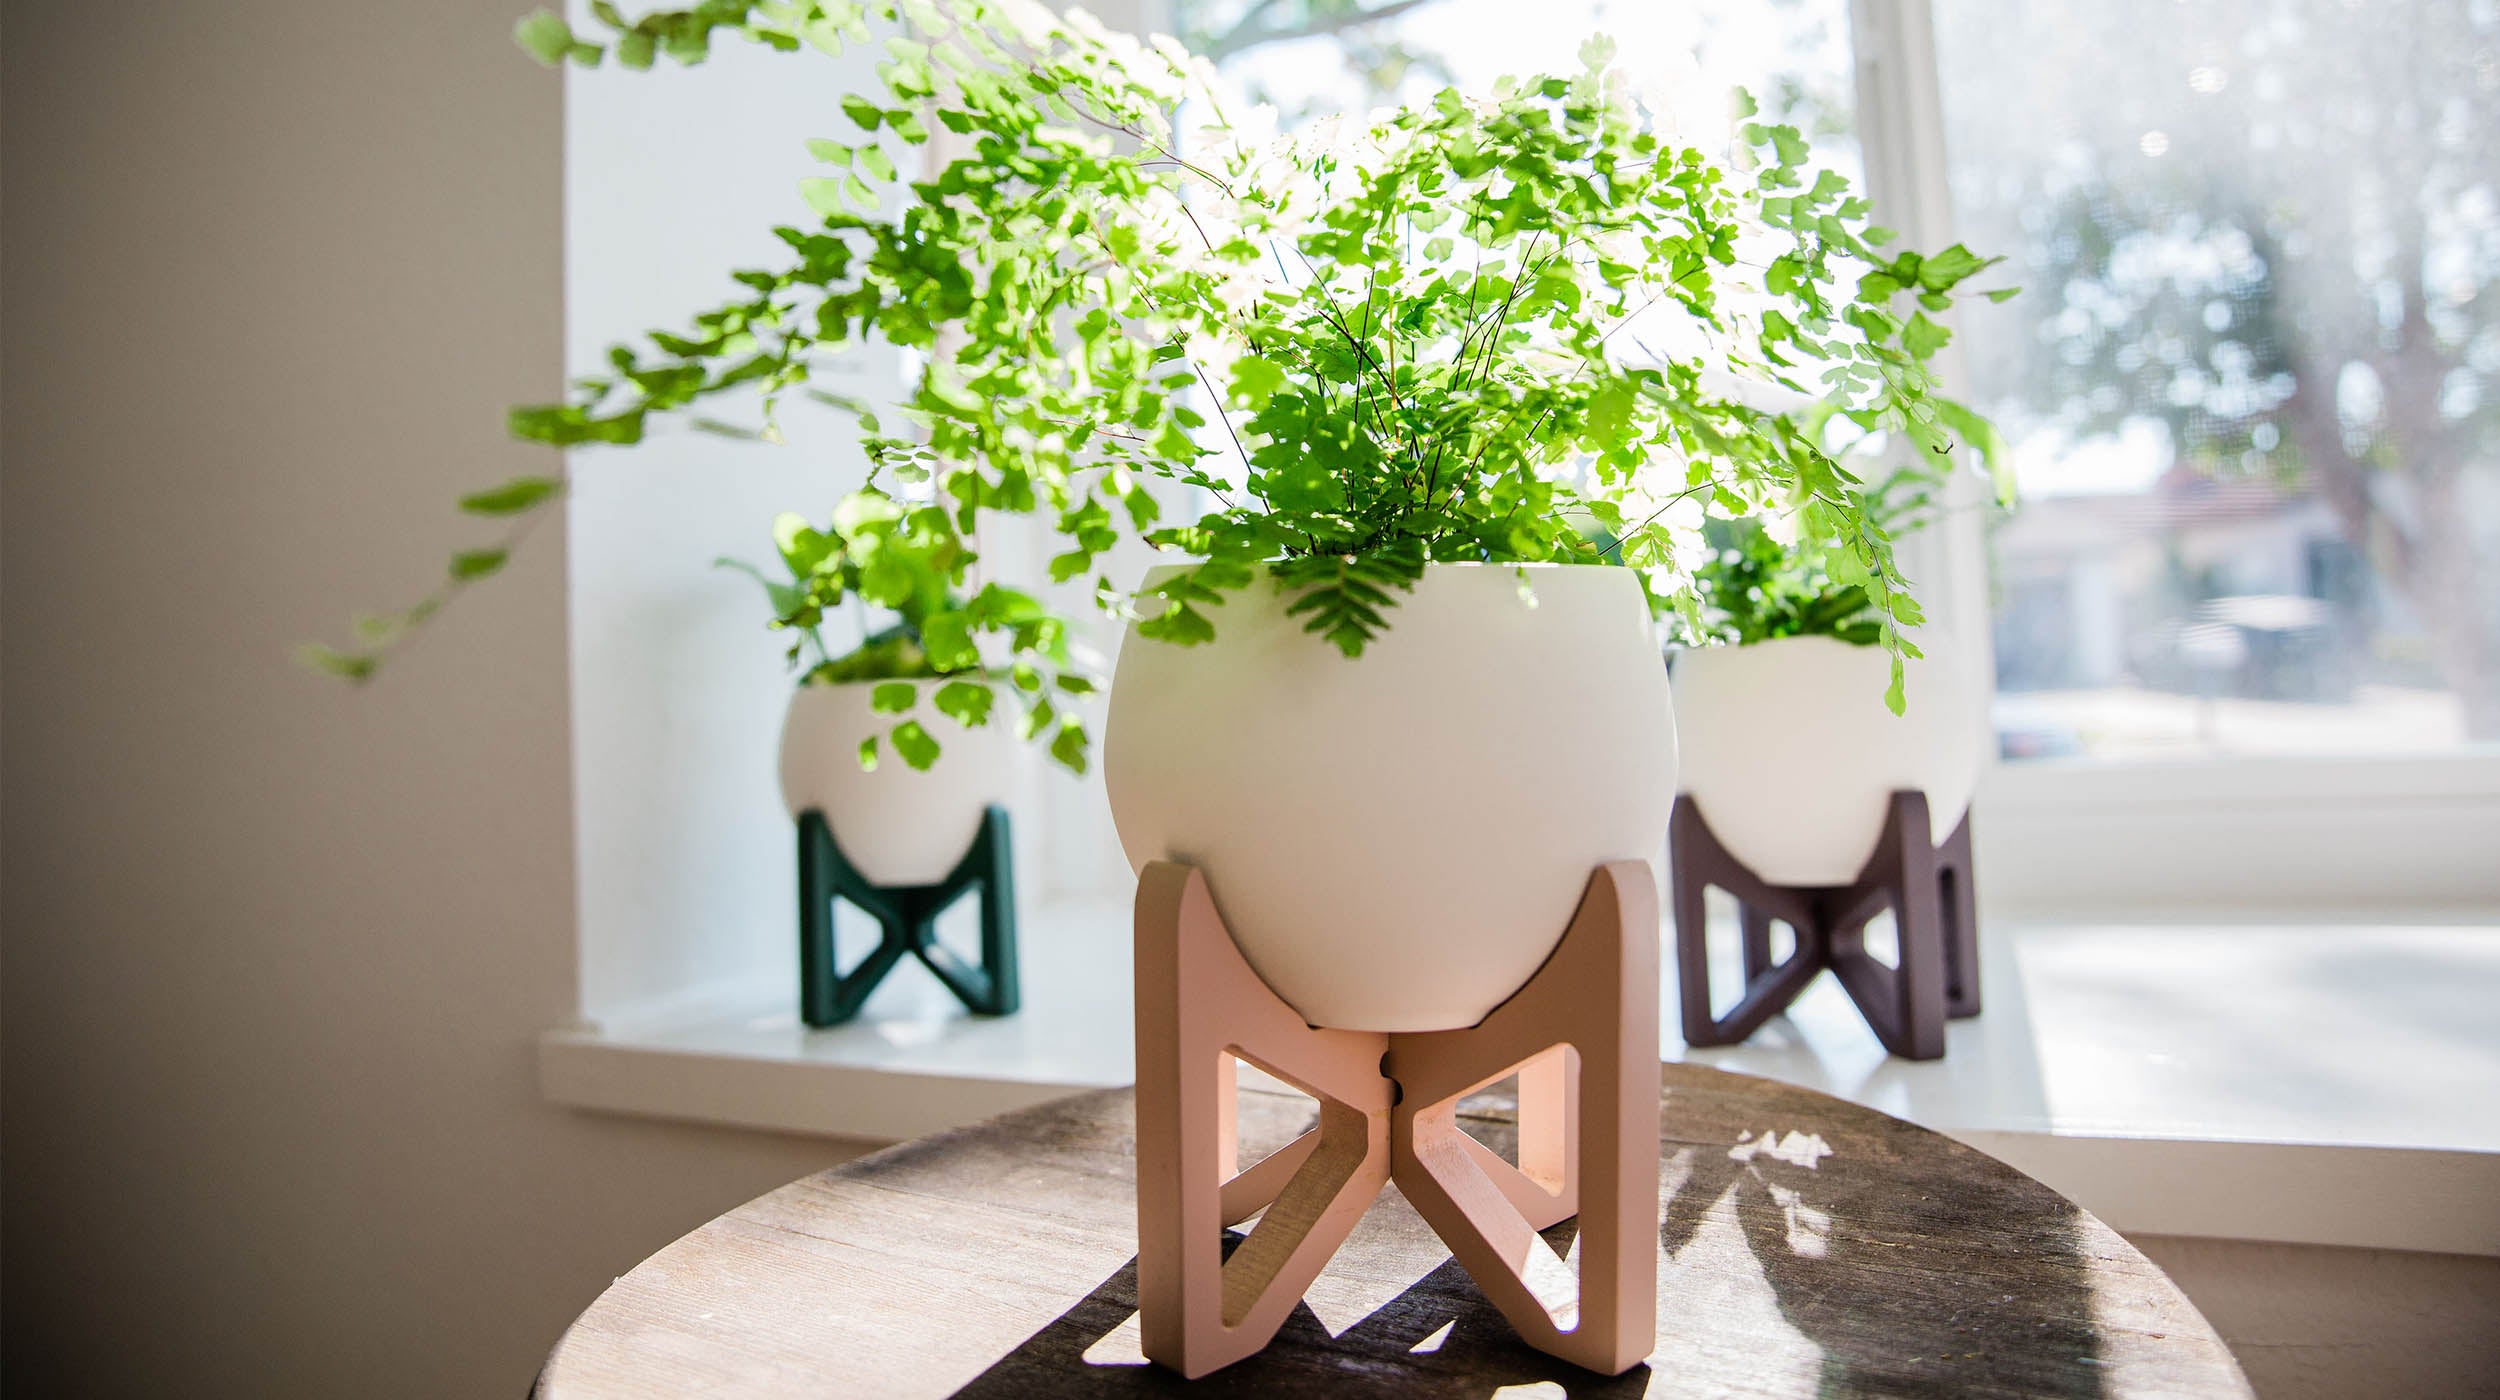 three braid & wood tabletop plant stands with plants styled next to window